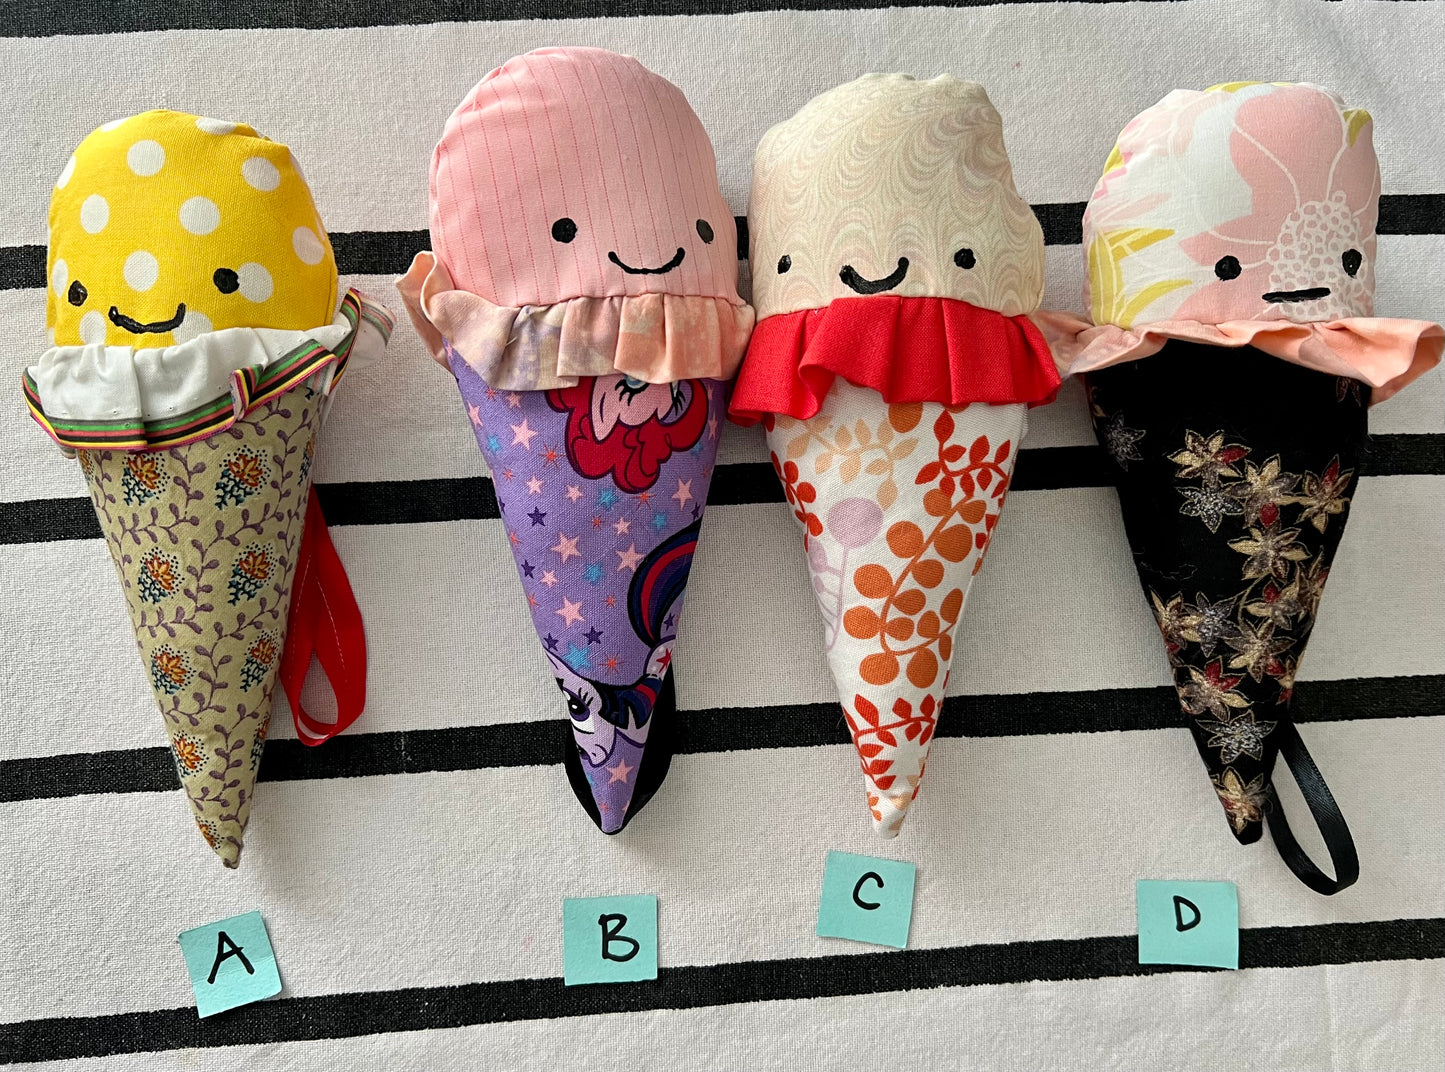 Ice cream cone plushies with handpainted faces, lined up with the letters A B C D below them